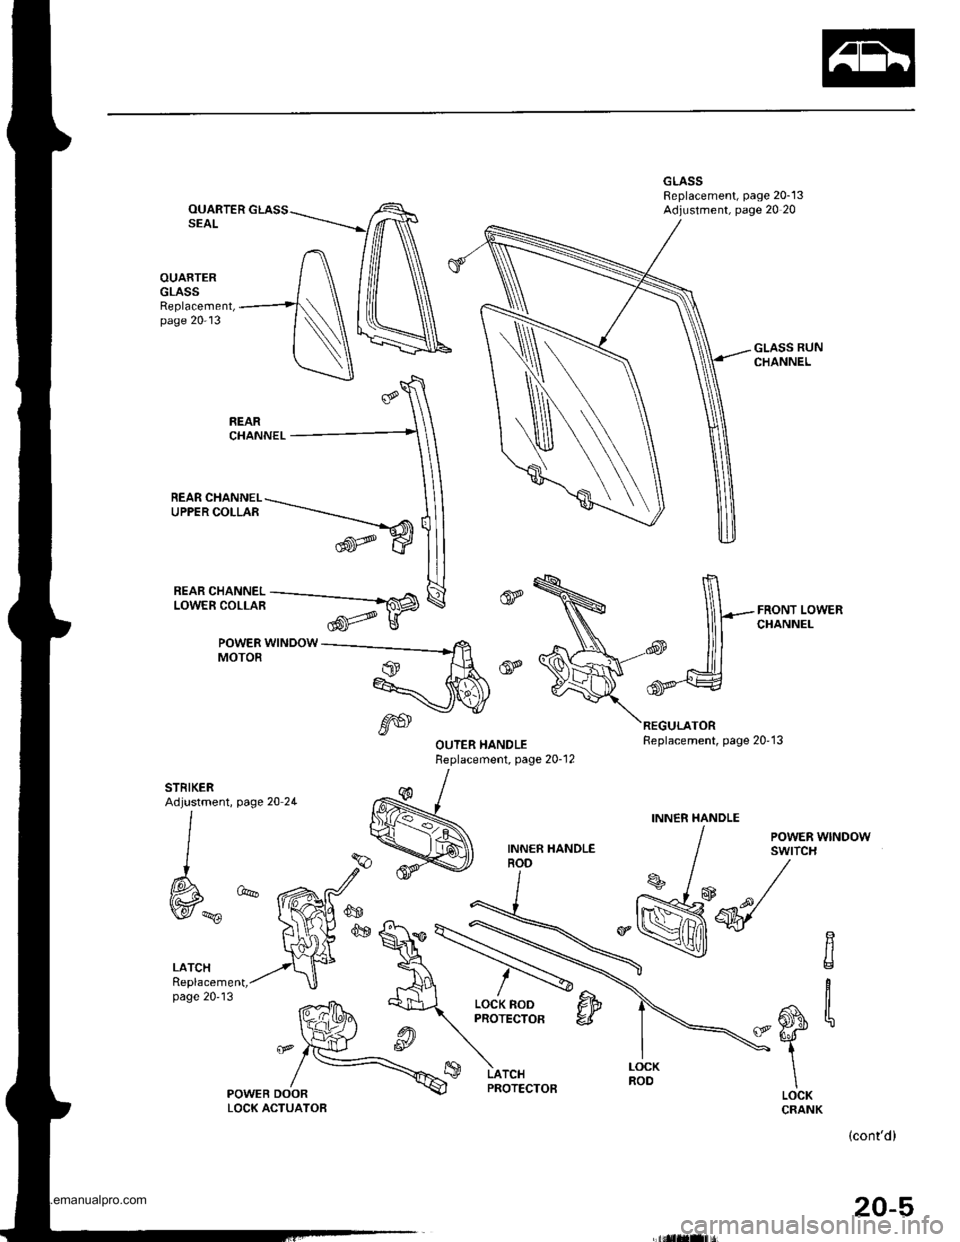 HONDA CR-V 2000 RD1-RD3 / 1.G Workshop Manual 
OUARTERSEAL
OUARTERGLASSReplacement,page 20-13
-flHiili^i--_Fffi
POWER WINDOWMOTOR
REAR CHANNEL-\UPPERCOLLAR -.-----_----_-""
trw
page 20 2L
LATCHReplacement,page 2013
POWEB DOORLOCK ACTUATOB
,6S
R